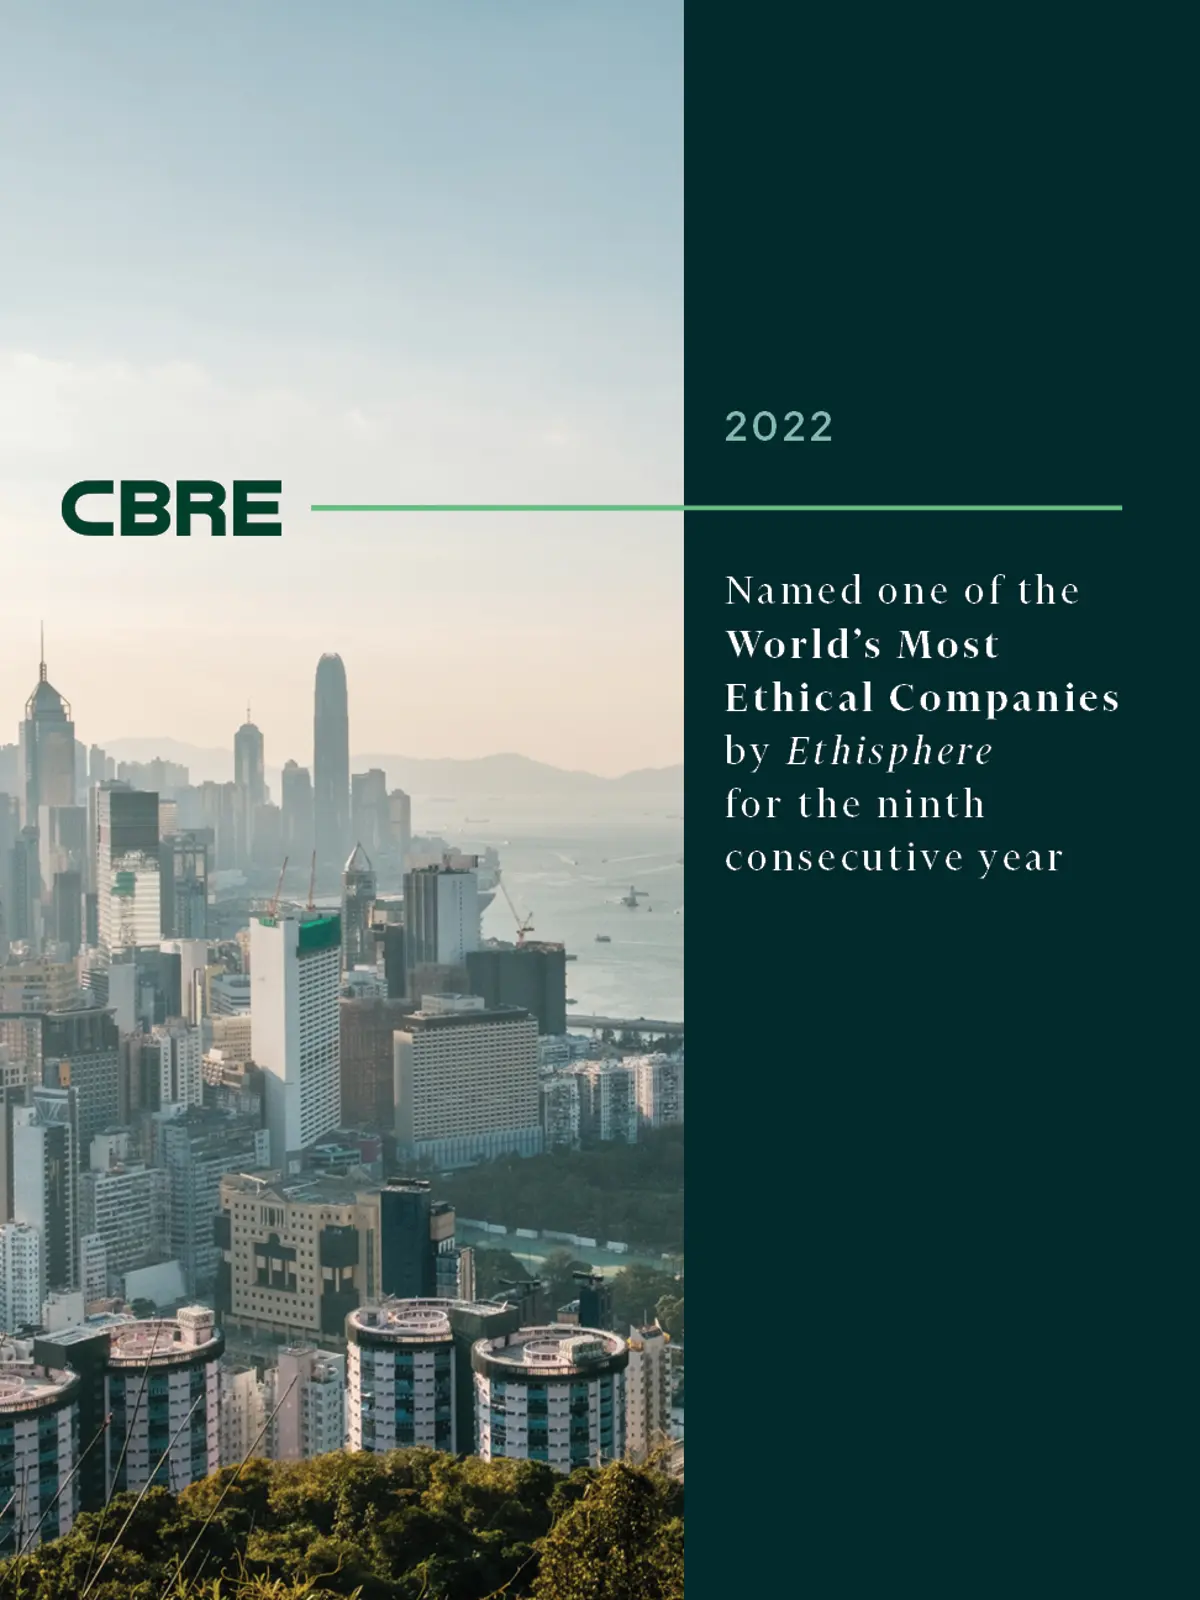 CBRE named one of the world's most ethical companies by Ethisphere for ninth consecutive year